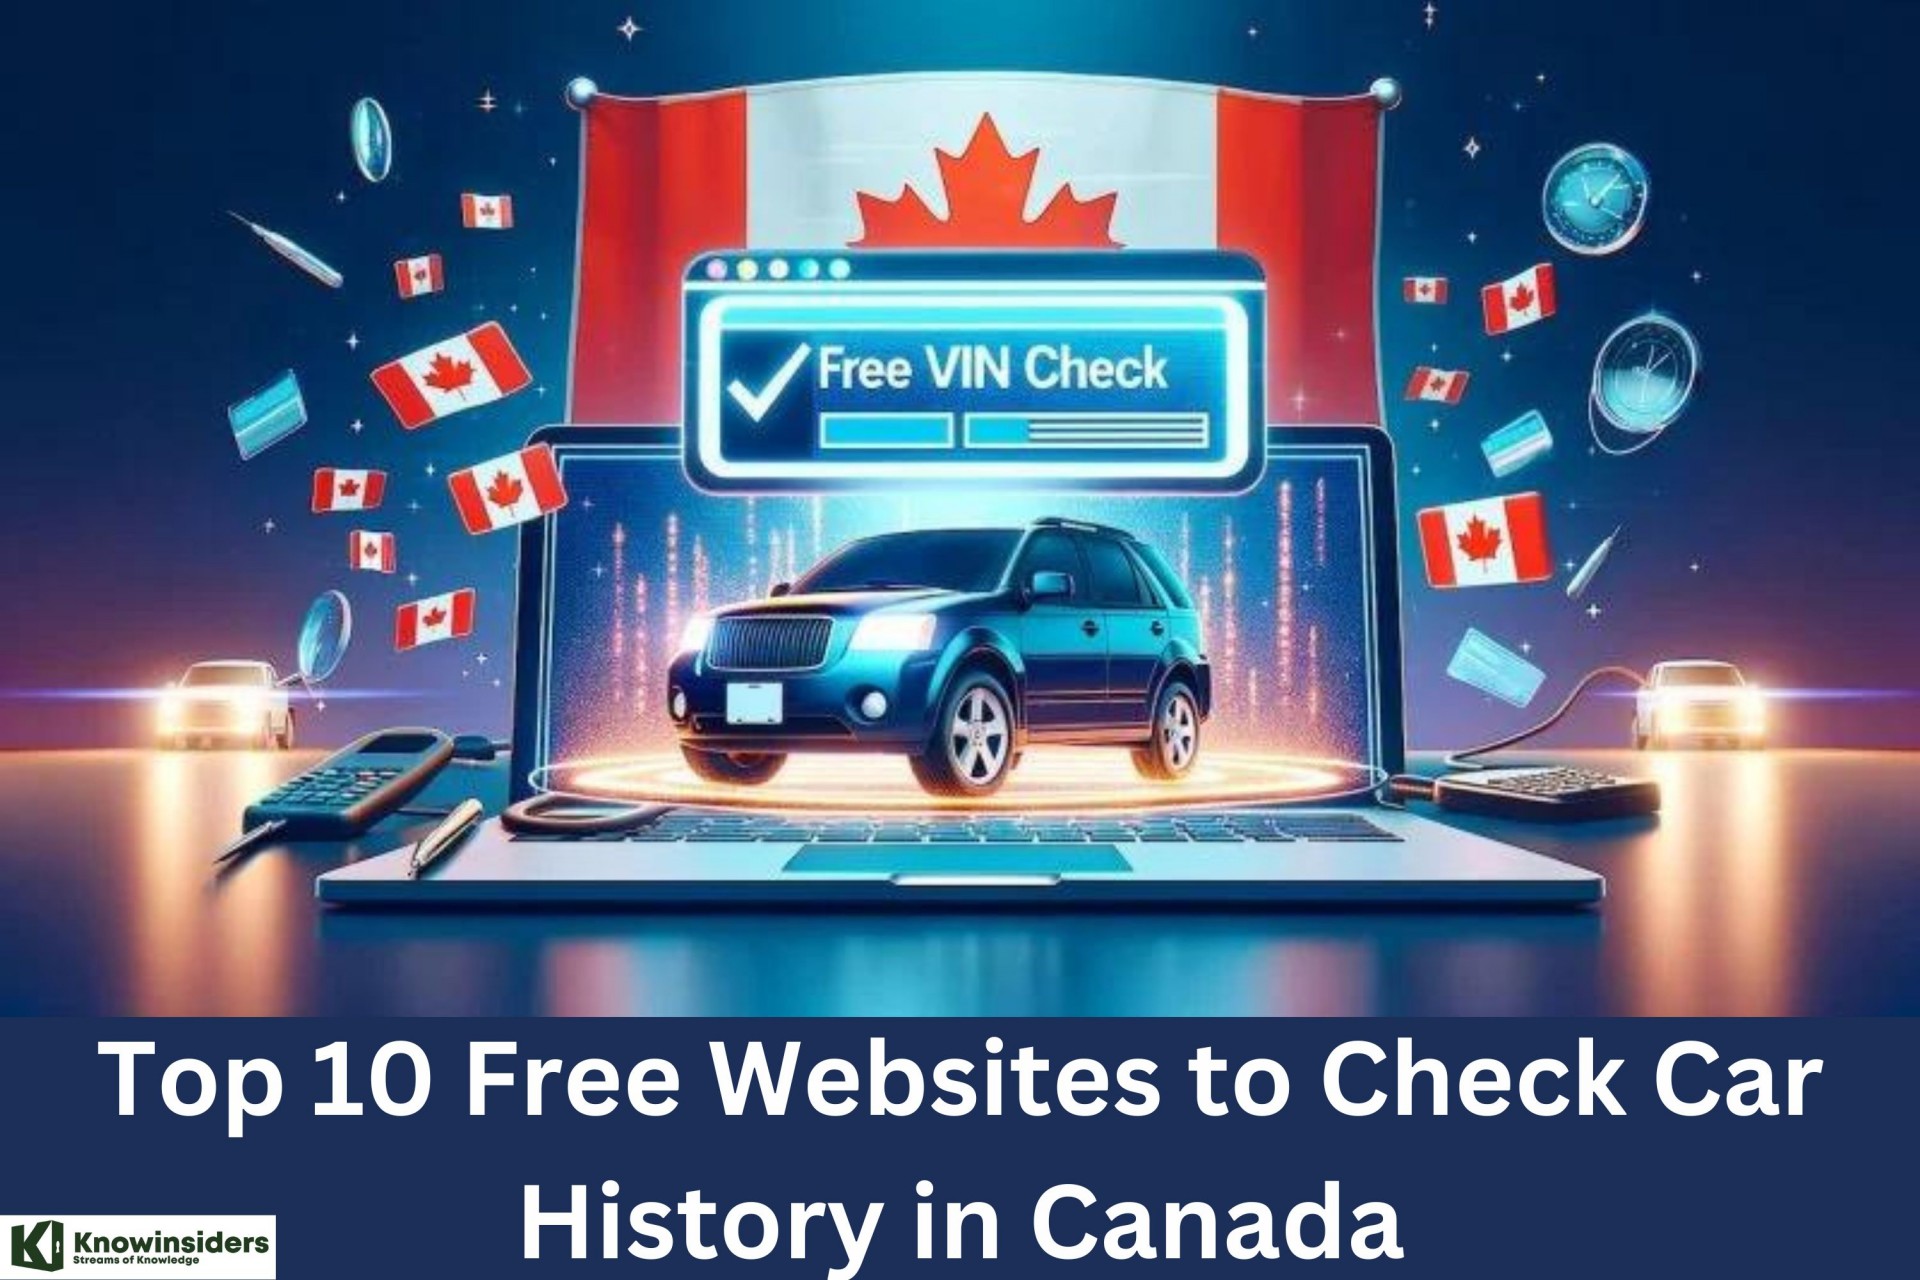 How Check A Car History in Canada - 10 Best Free Websites to Find the VIN